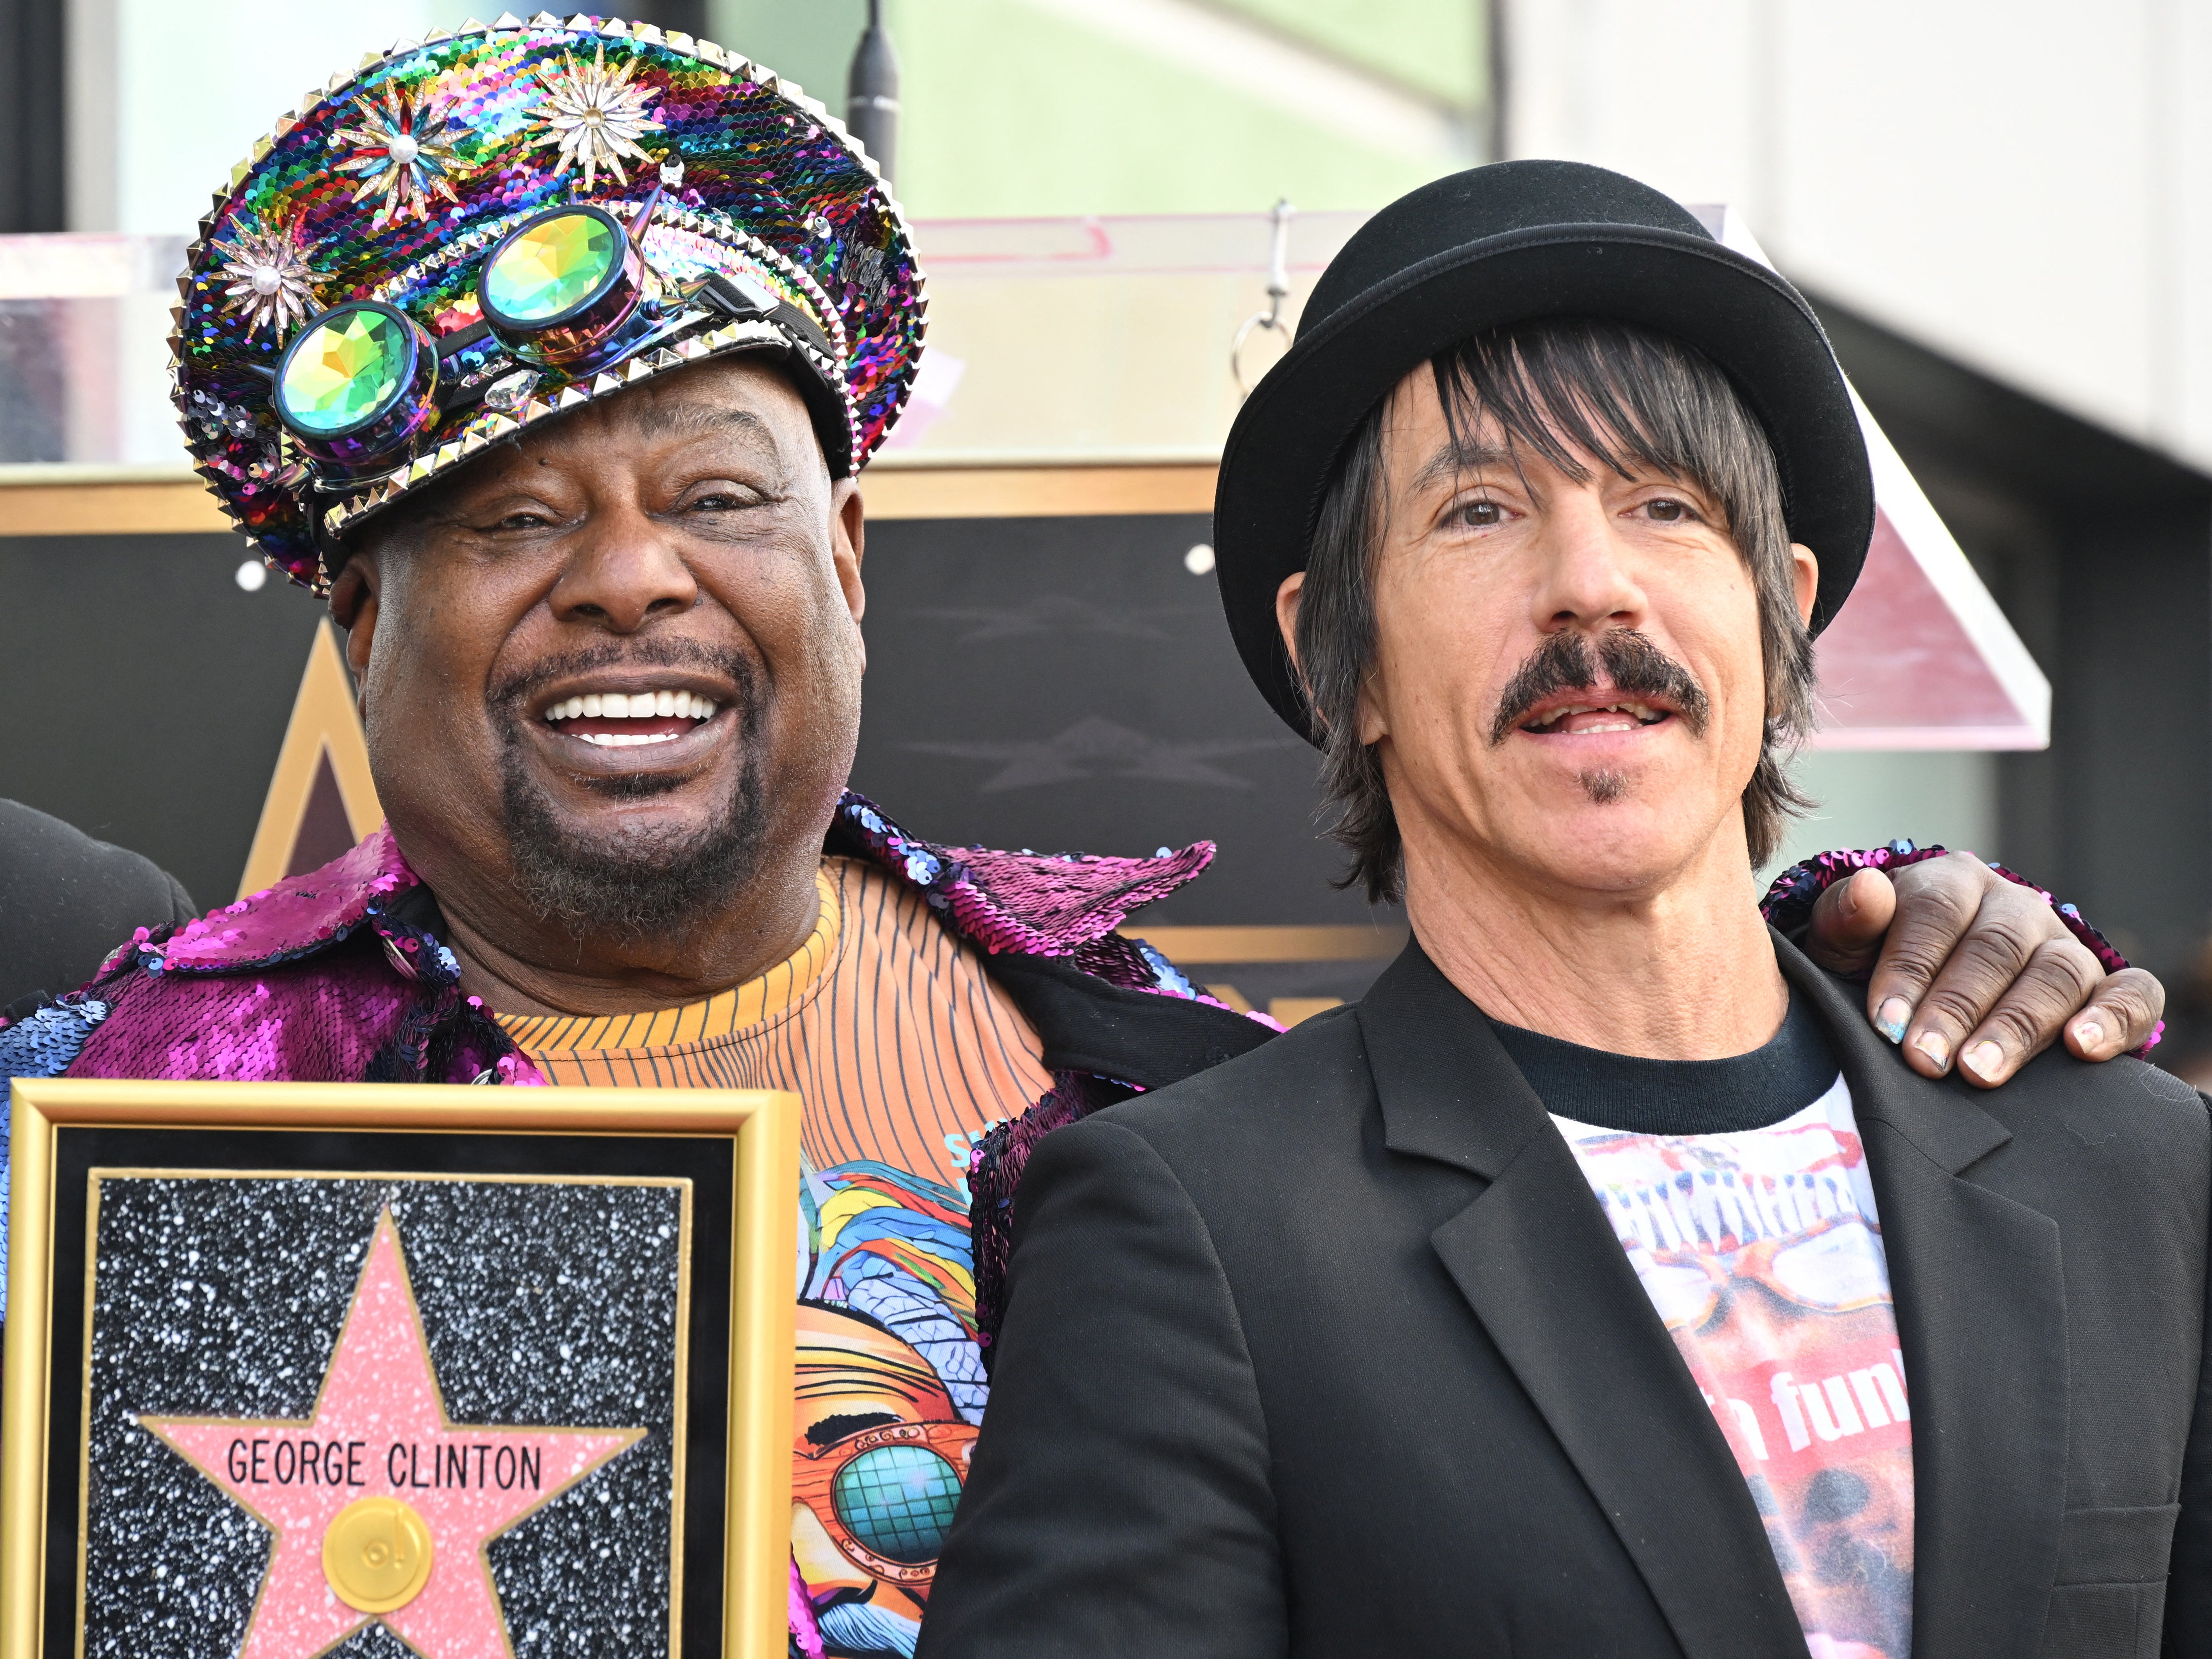 George Clinton (left) and The Red Hot Chili Peppers’ Anthony Kiedis at the unveiling of Clinton’s star on the Hollywood Walk of Fame